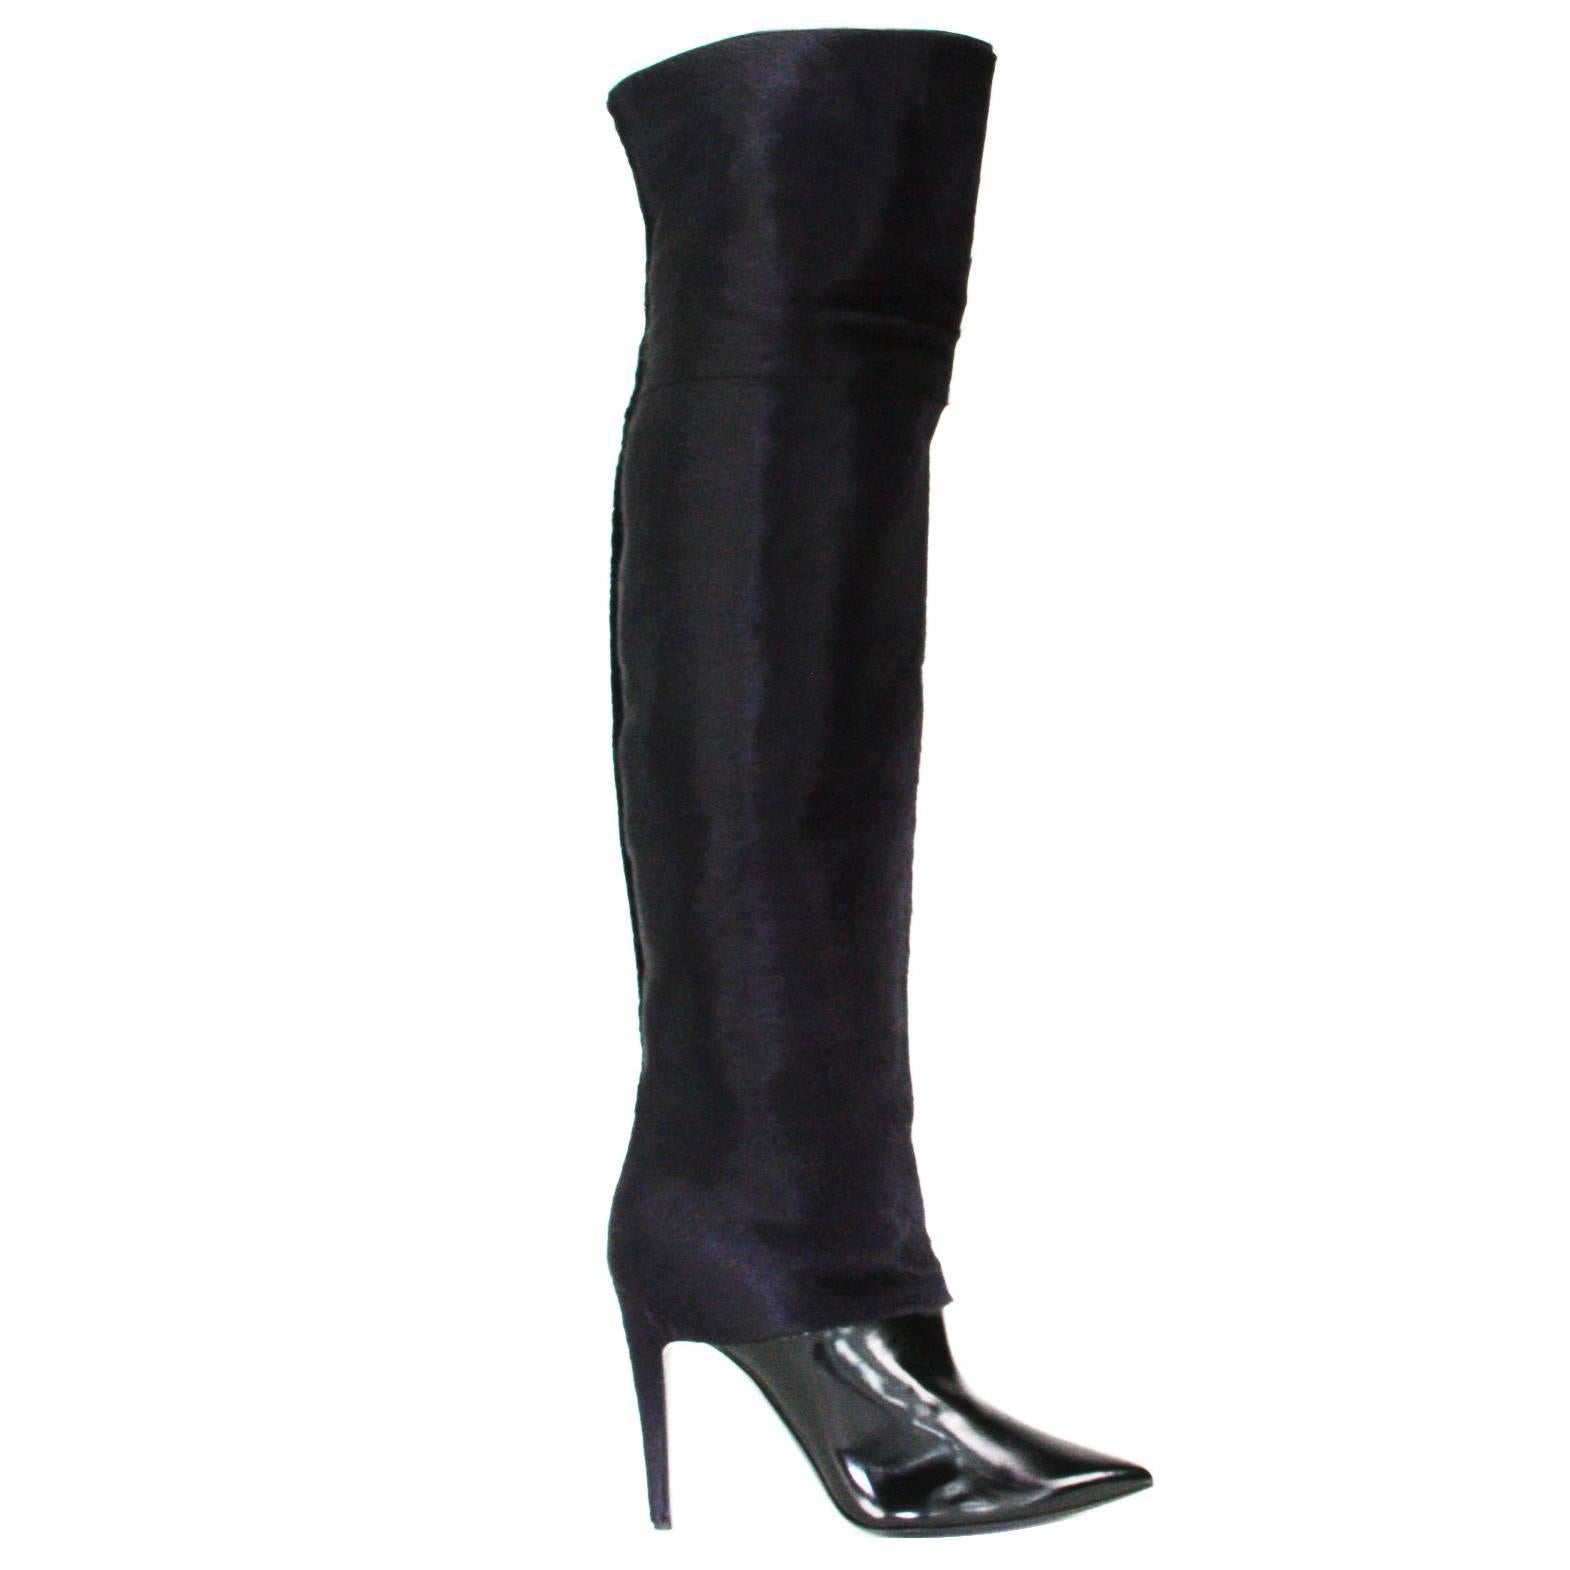 New PIERRE HARDY Italy Pony-Hair Over the Knee Leather Boots It. 39.5 - US 9